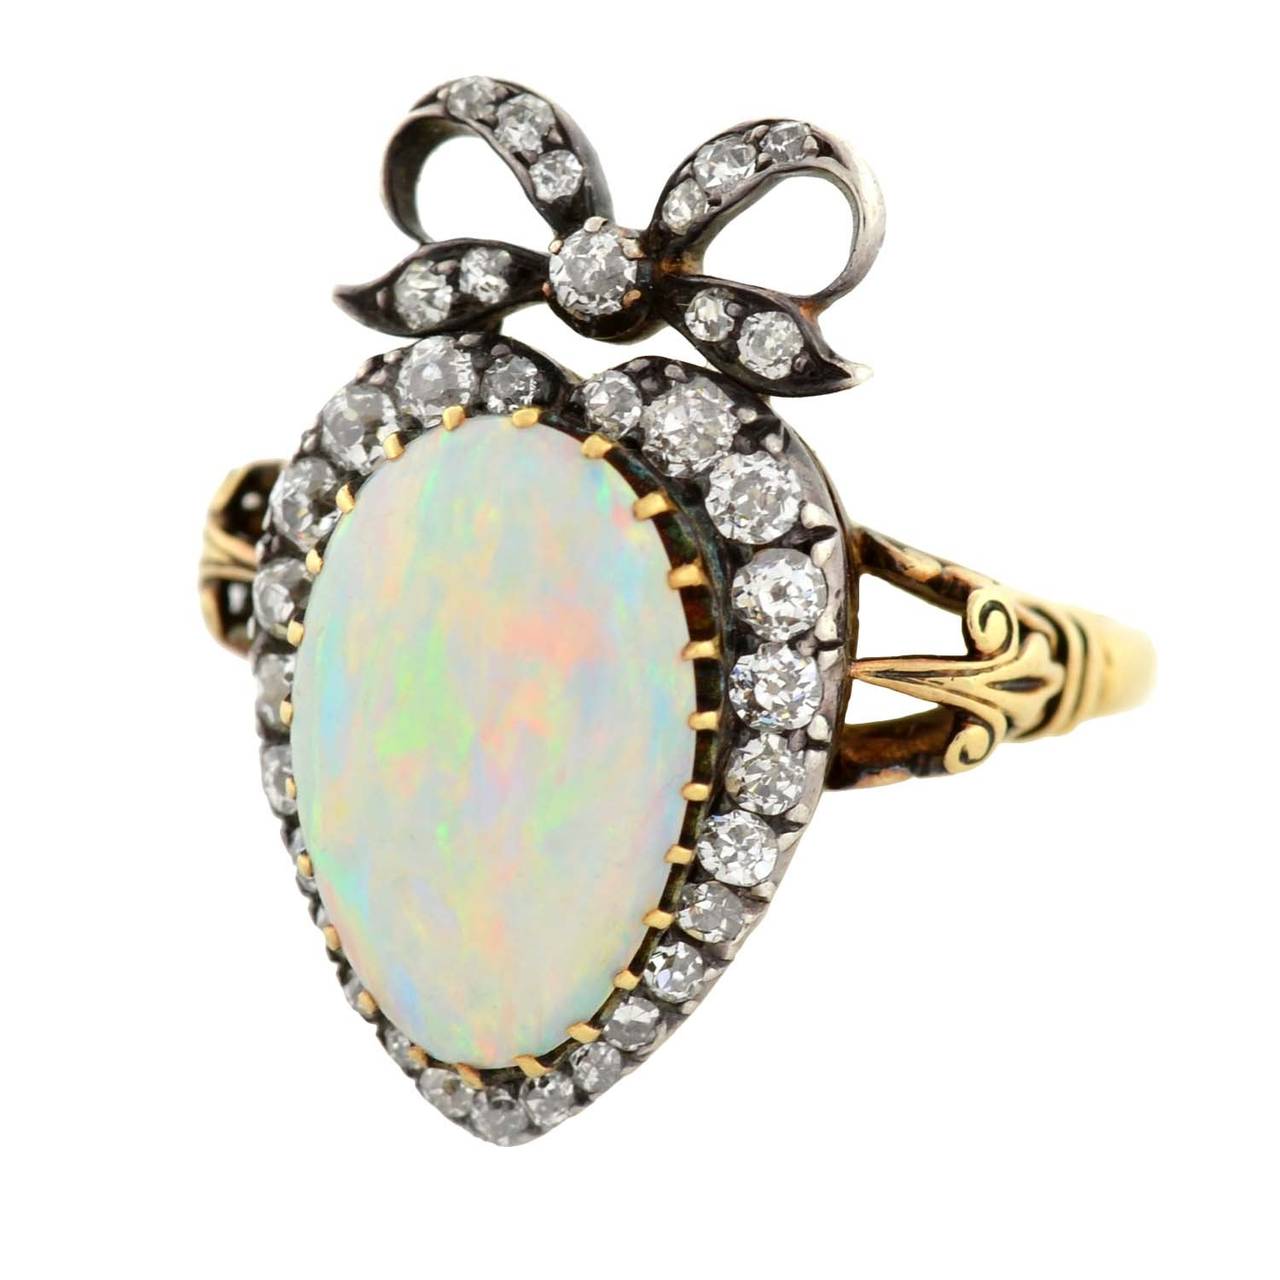 A very unusual opal and diamond ring from the Mid Victorian (circa 1870) era! This exquisite ring holds an opal cabochon at the center of a sterling-topped 18kt yellow gold mounting. A gorgeous heart-shaped diamond halo surrounds the opal cabochon,